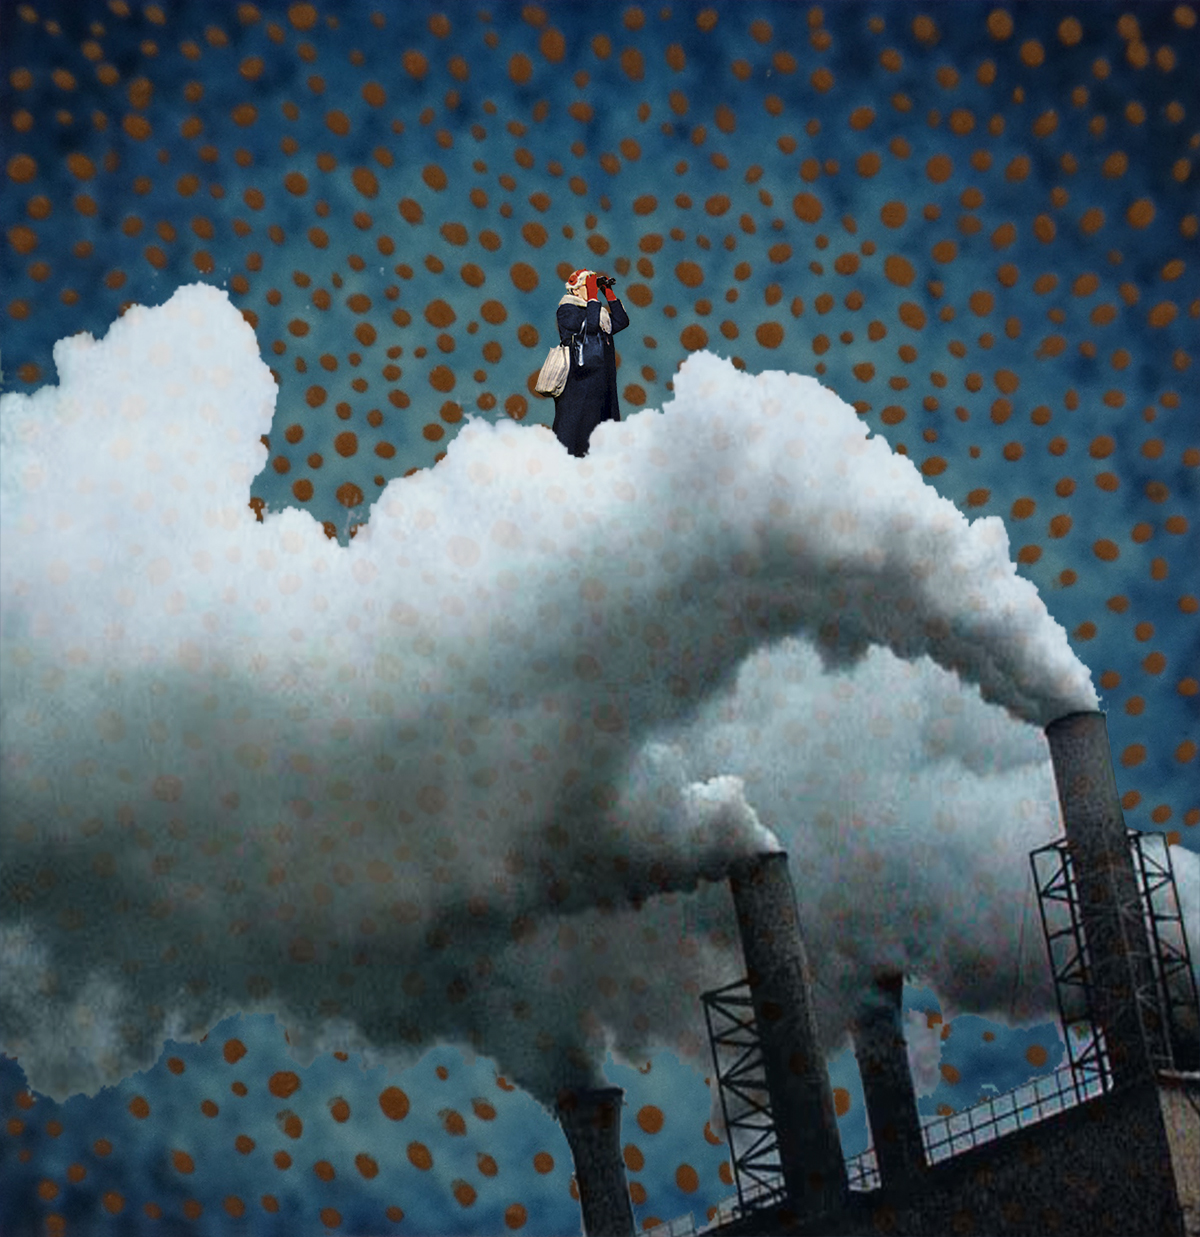 A digital collage titled Polluted of a person in a blue coat standing atop the smoke coming out of industrial smoke stacks. The background is dark blue with red orbs all around.